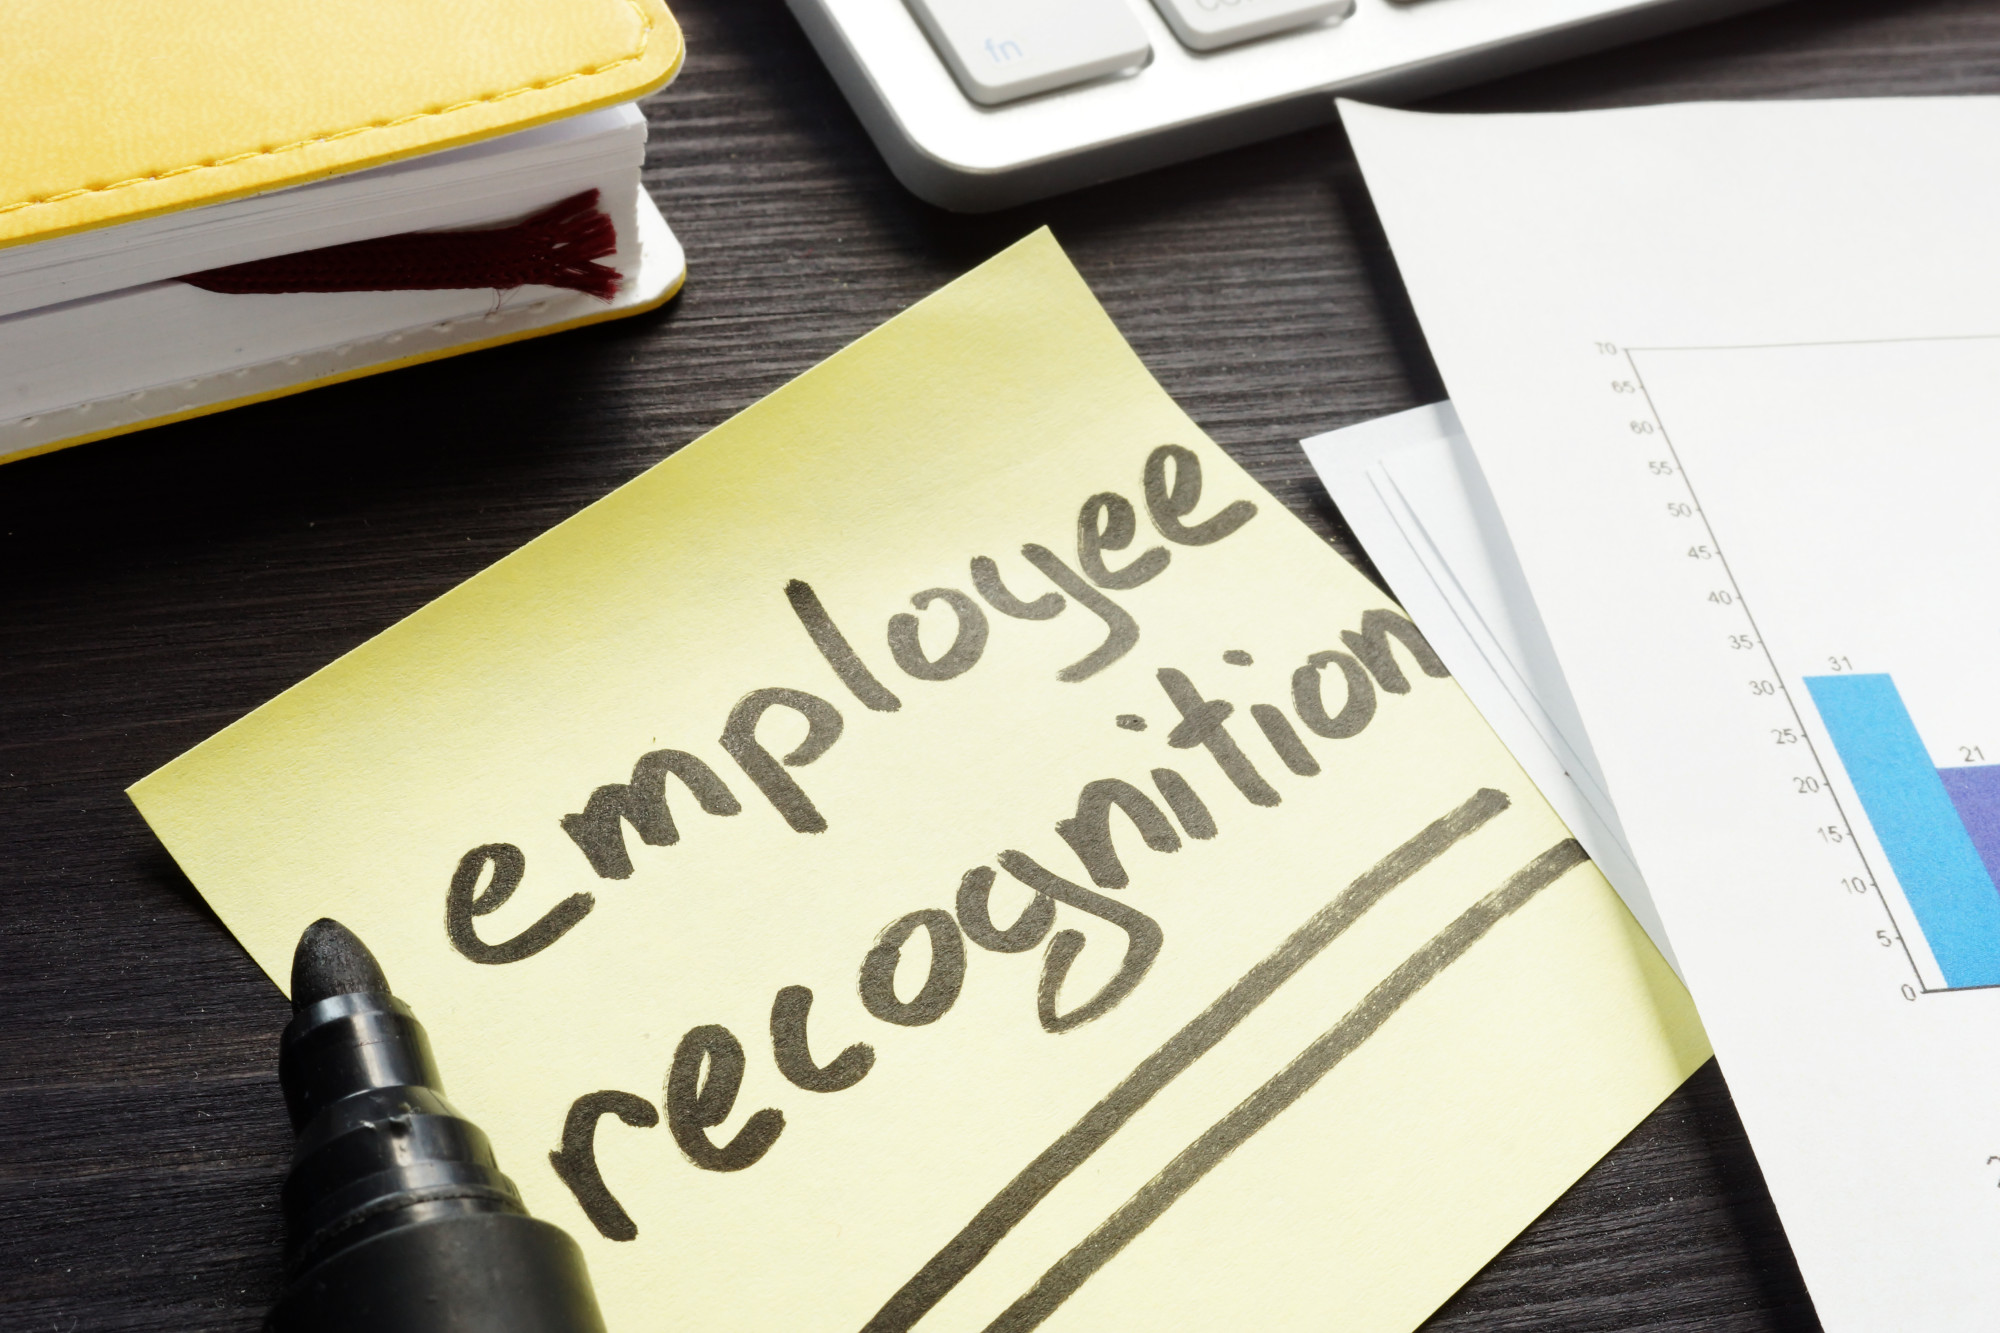 Why Employee Recognition Is Crucial to Business Success